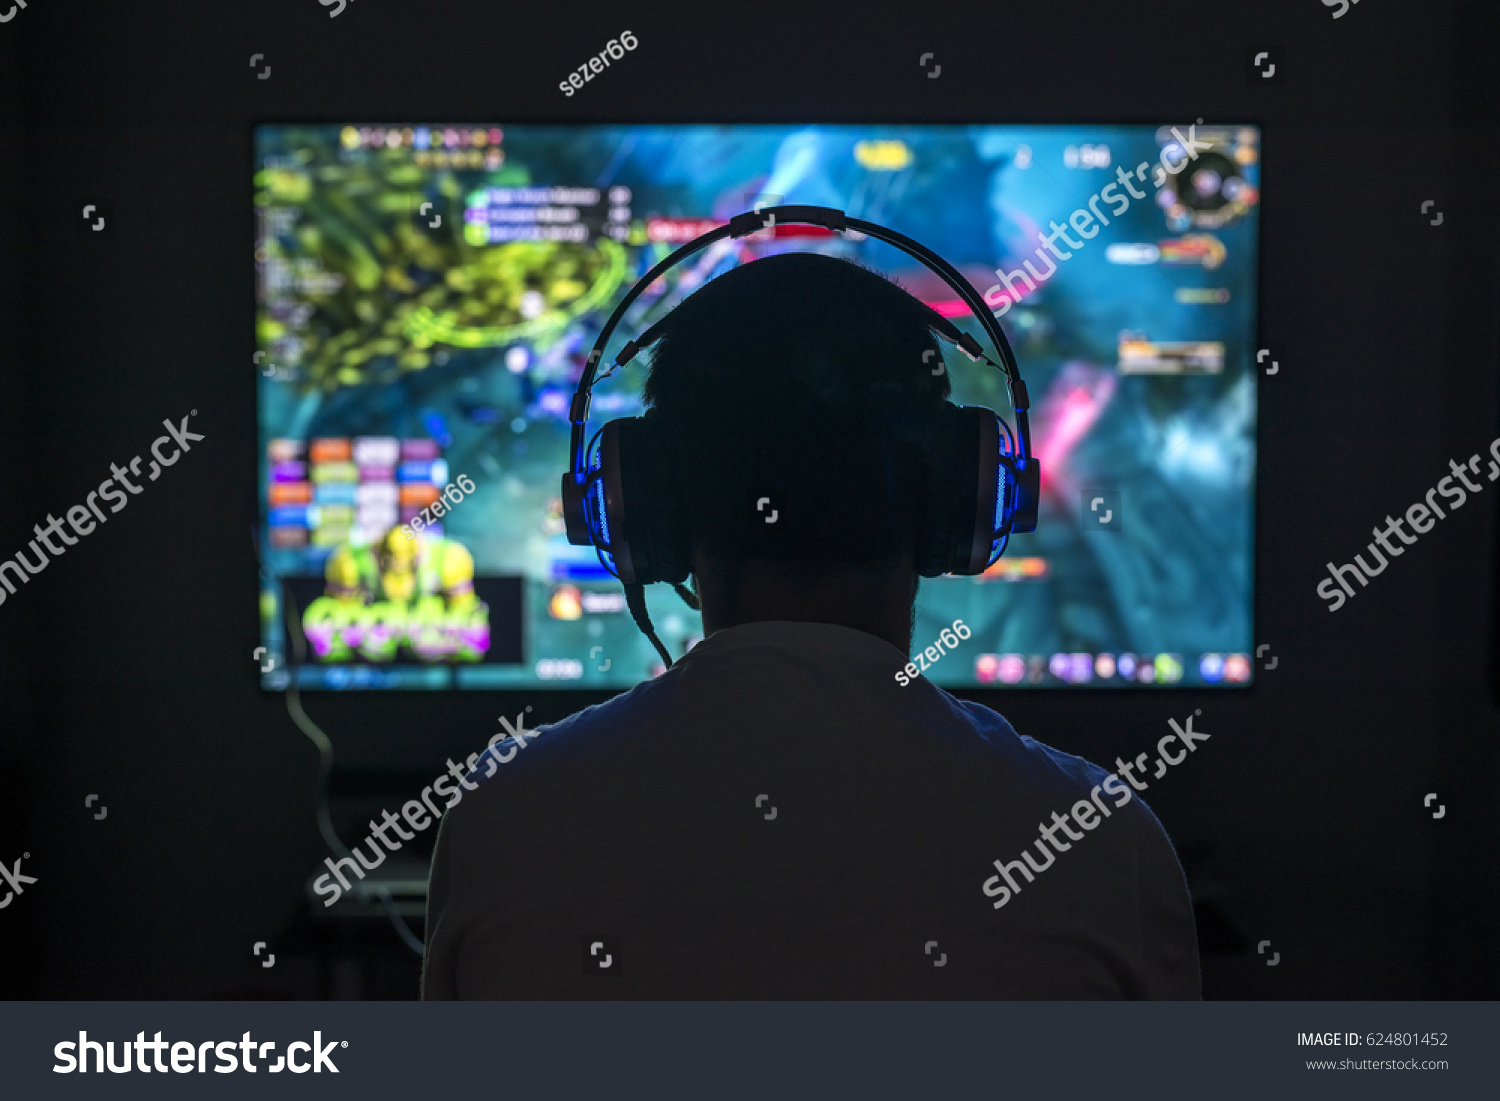 Young gamer playing video game wearing headphone.
 #624801452